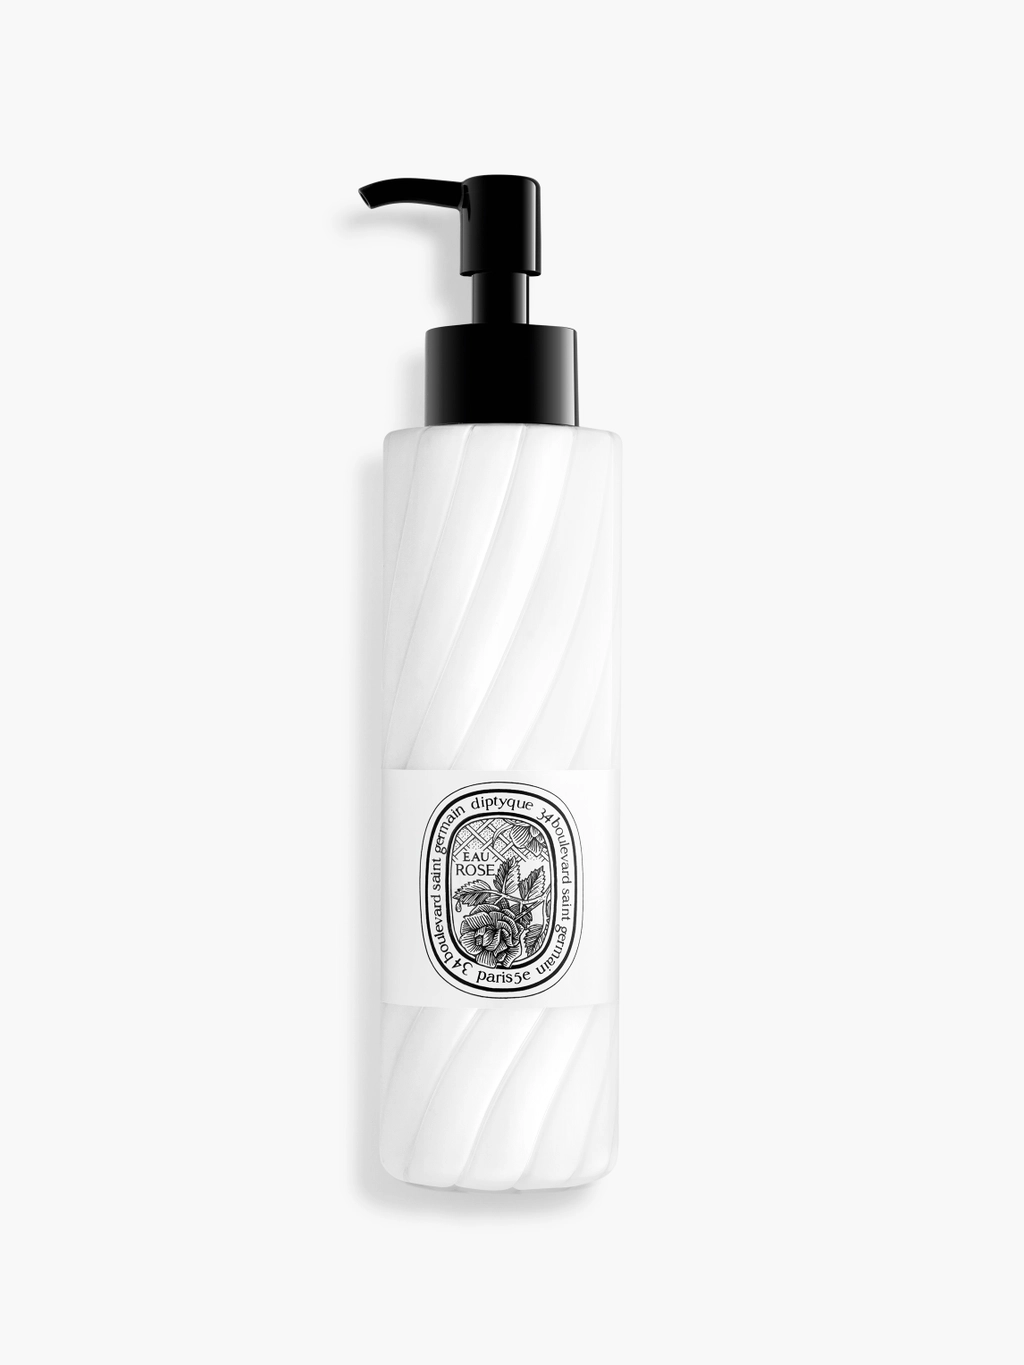 Rose - Perfumed hand and body Lotion Diptyque Paris